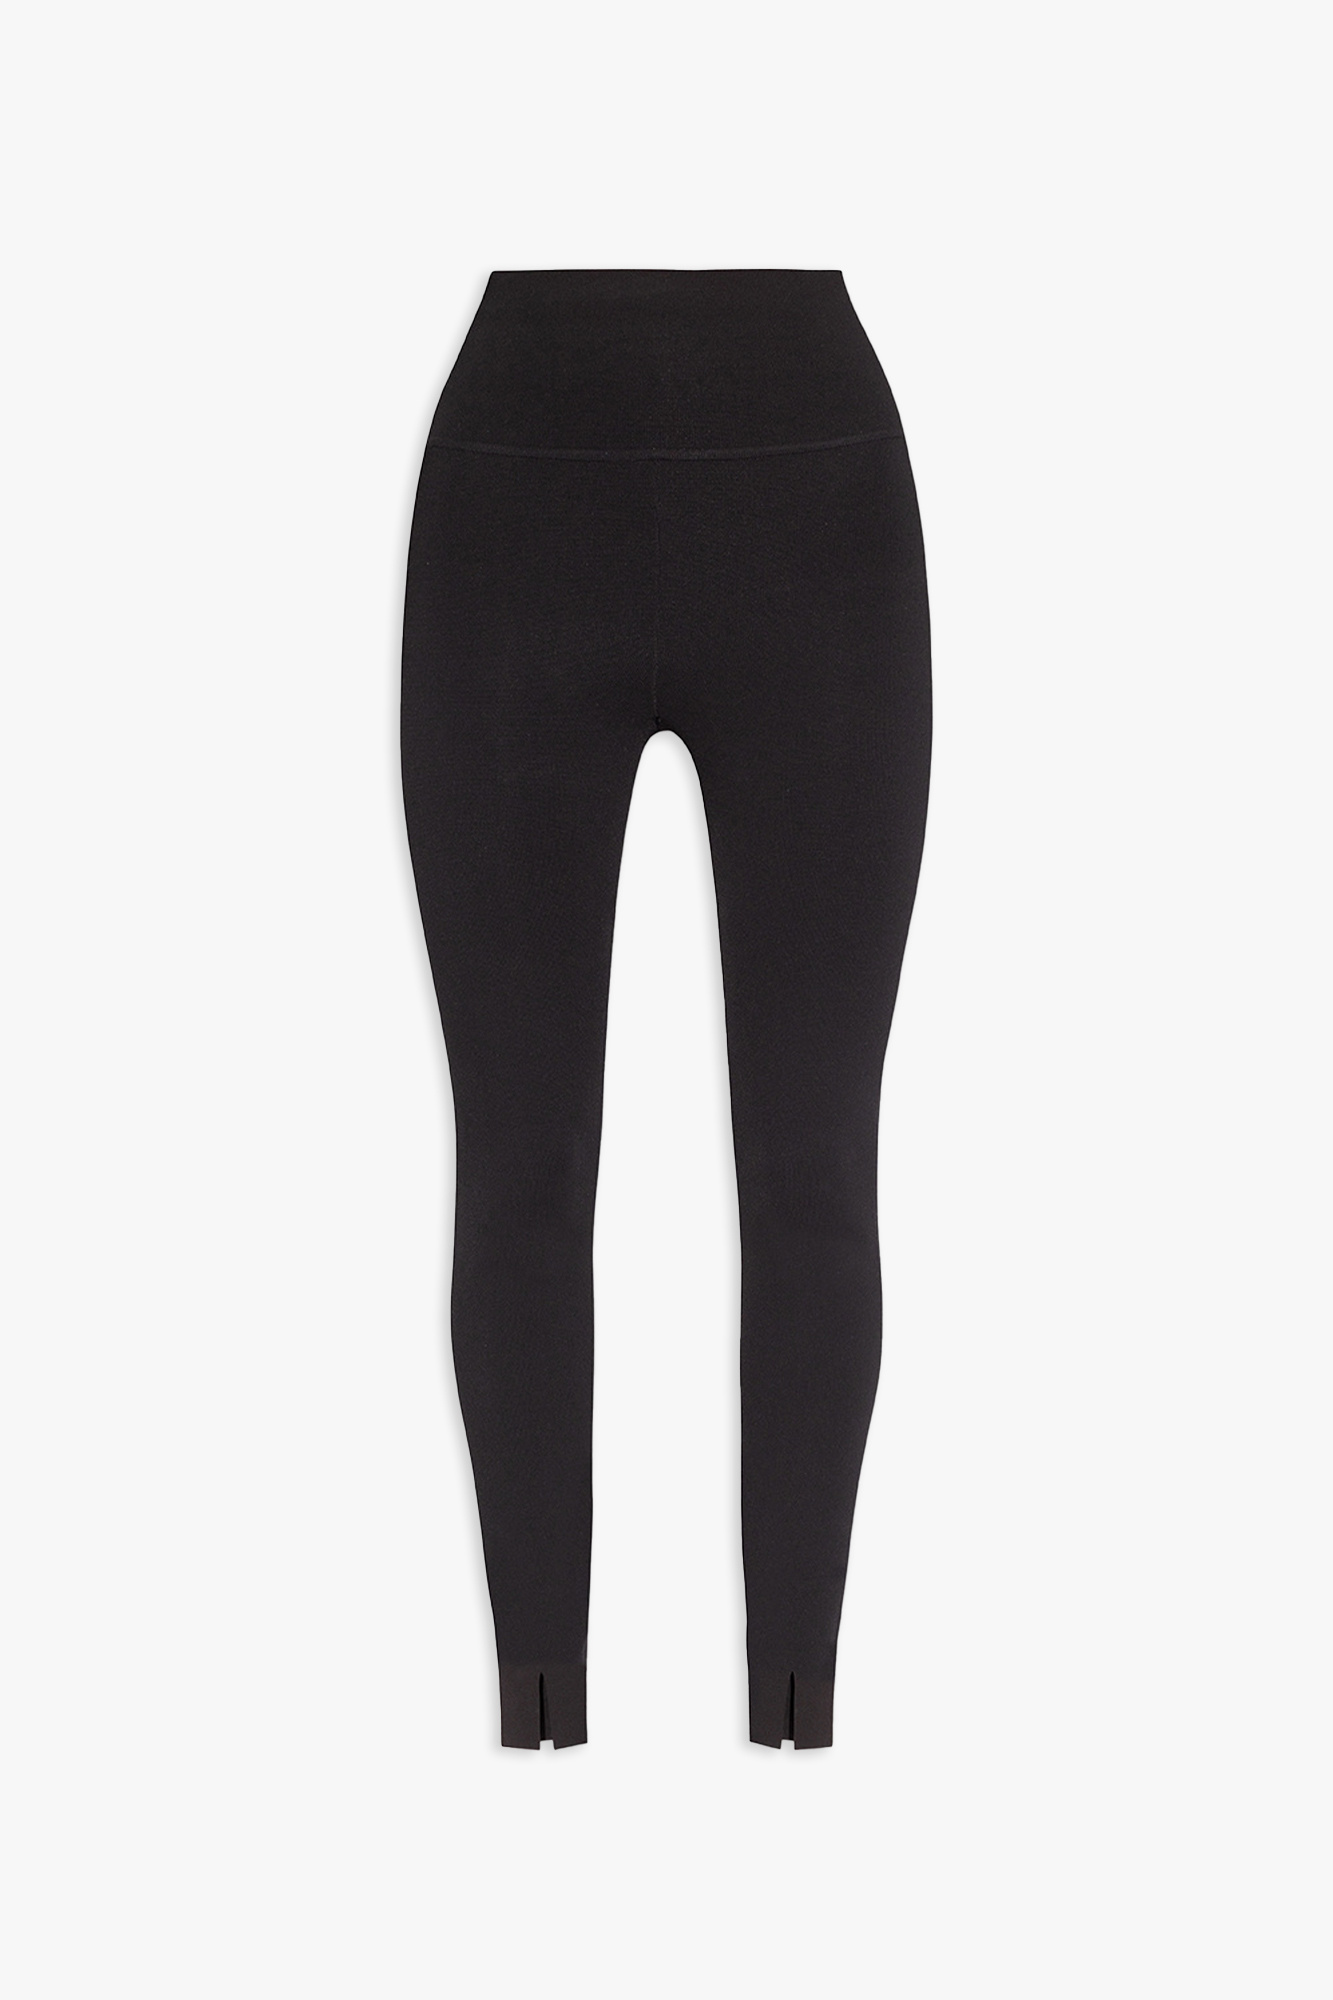 Luxury Designer Black Nebbia Tights And Leggings With Full Letter